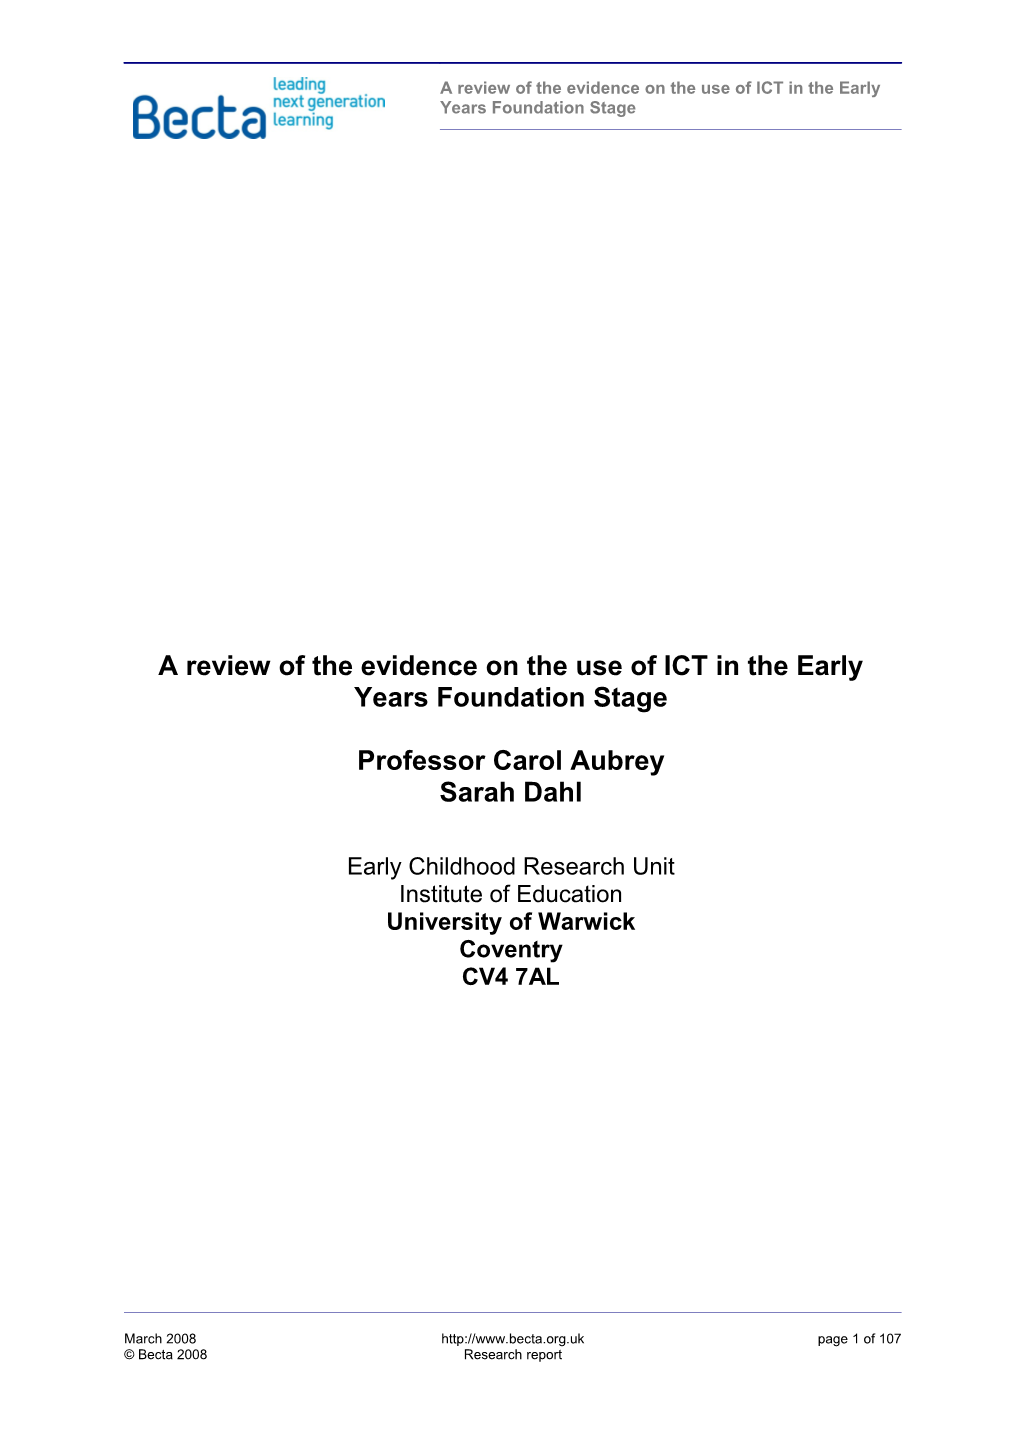 A Review of the Evidence on the Use of ICT in the Early Years Foundation Stage